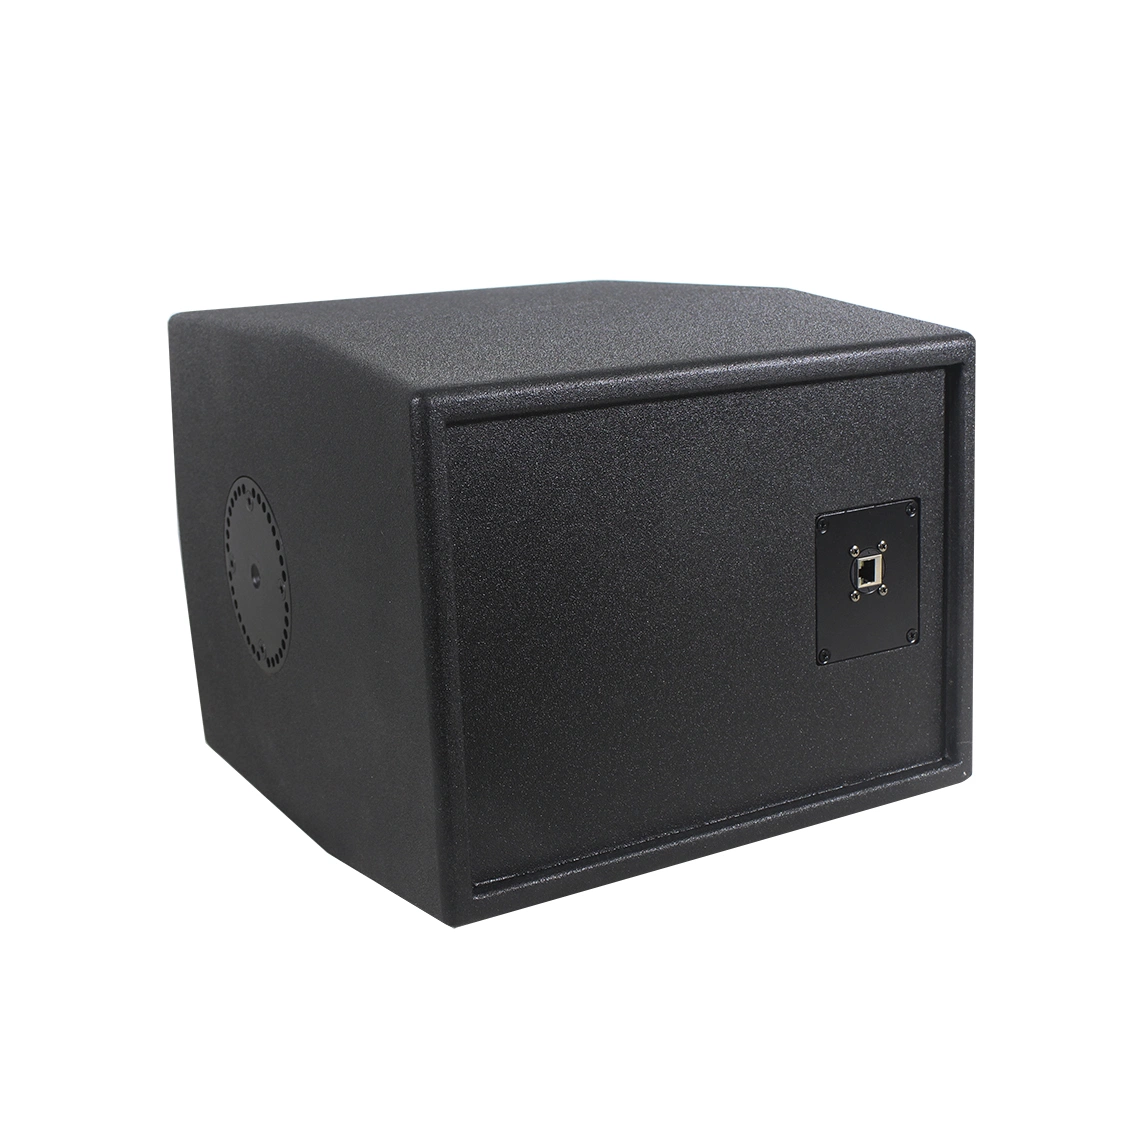 Professional Dante Audio System 8 Inch 120W 8ohm Poe Power Supply Subwoofer Speaker with DSP